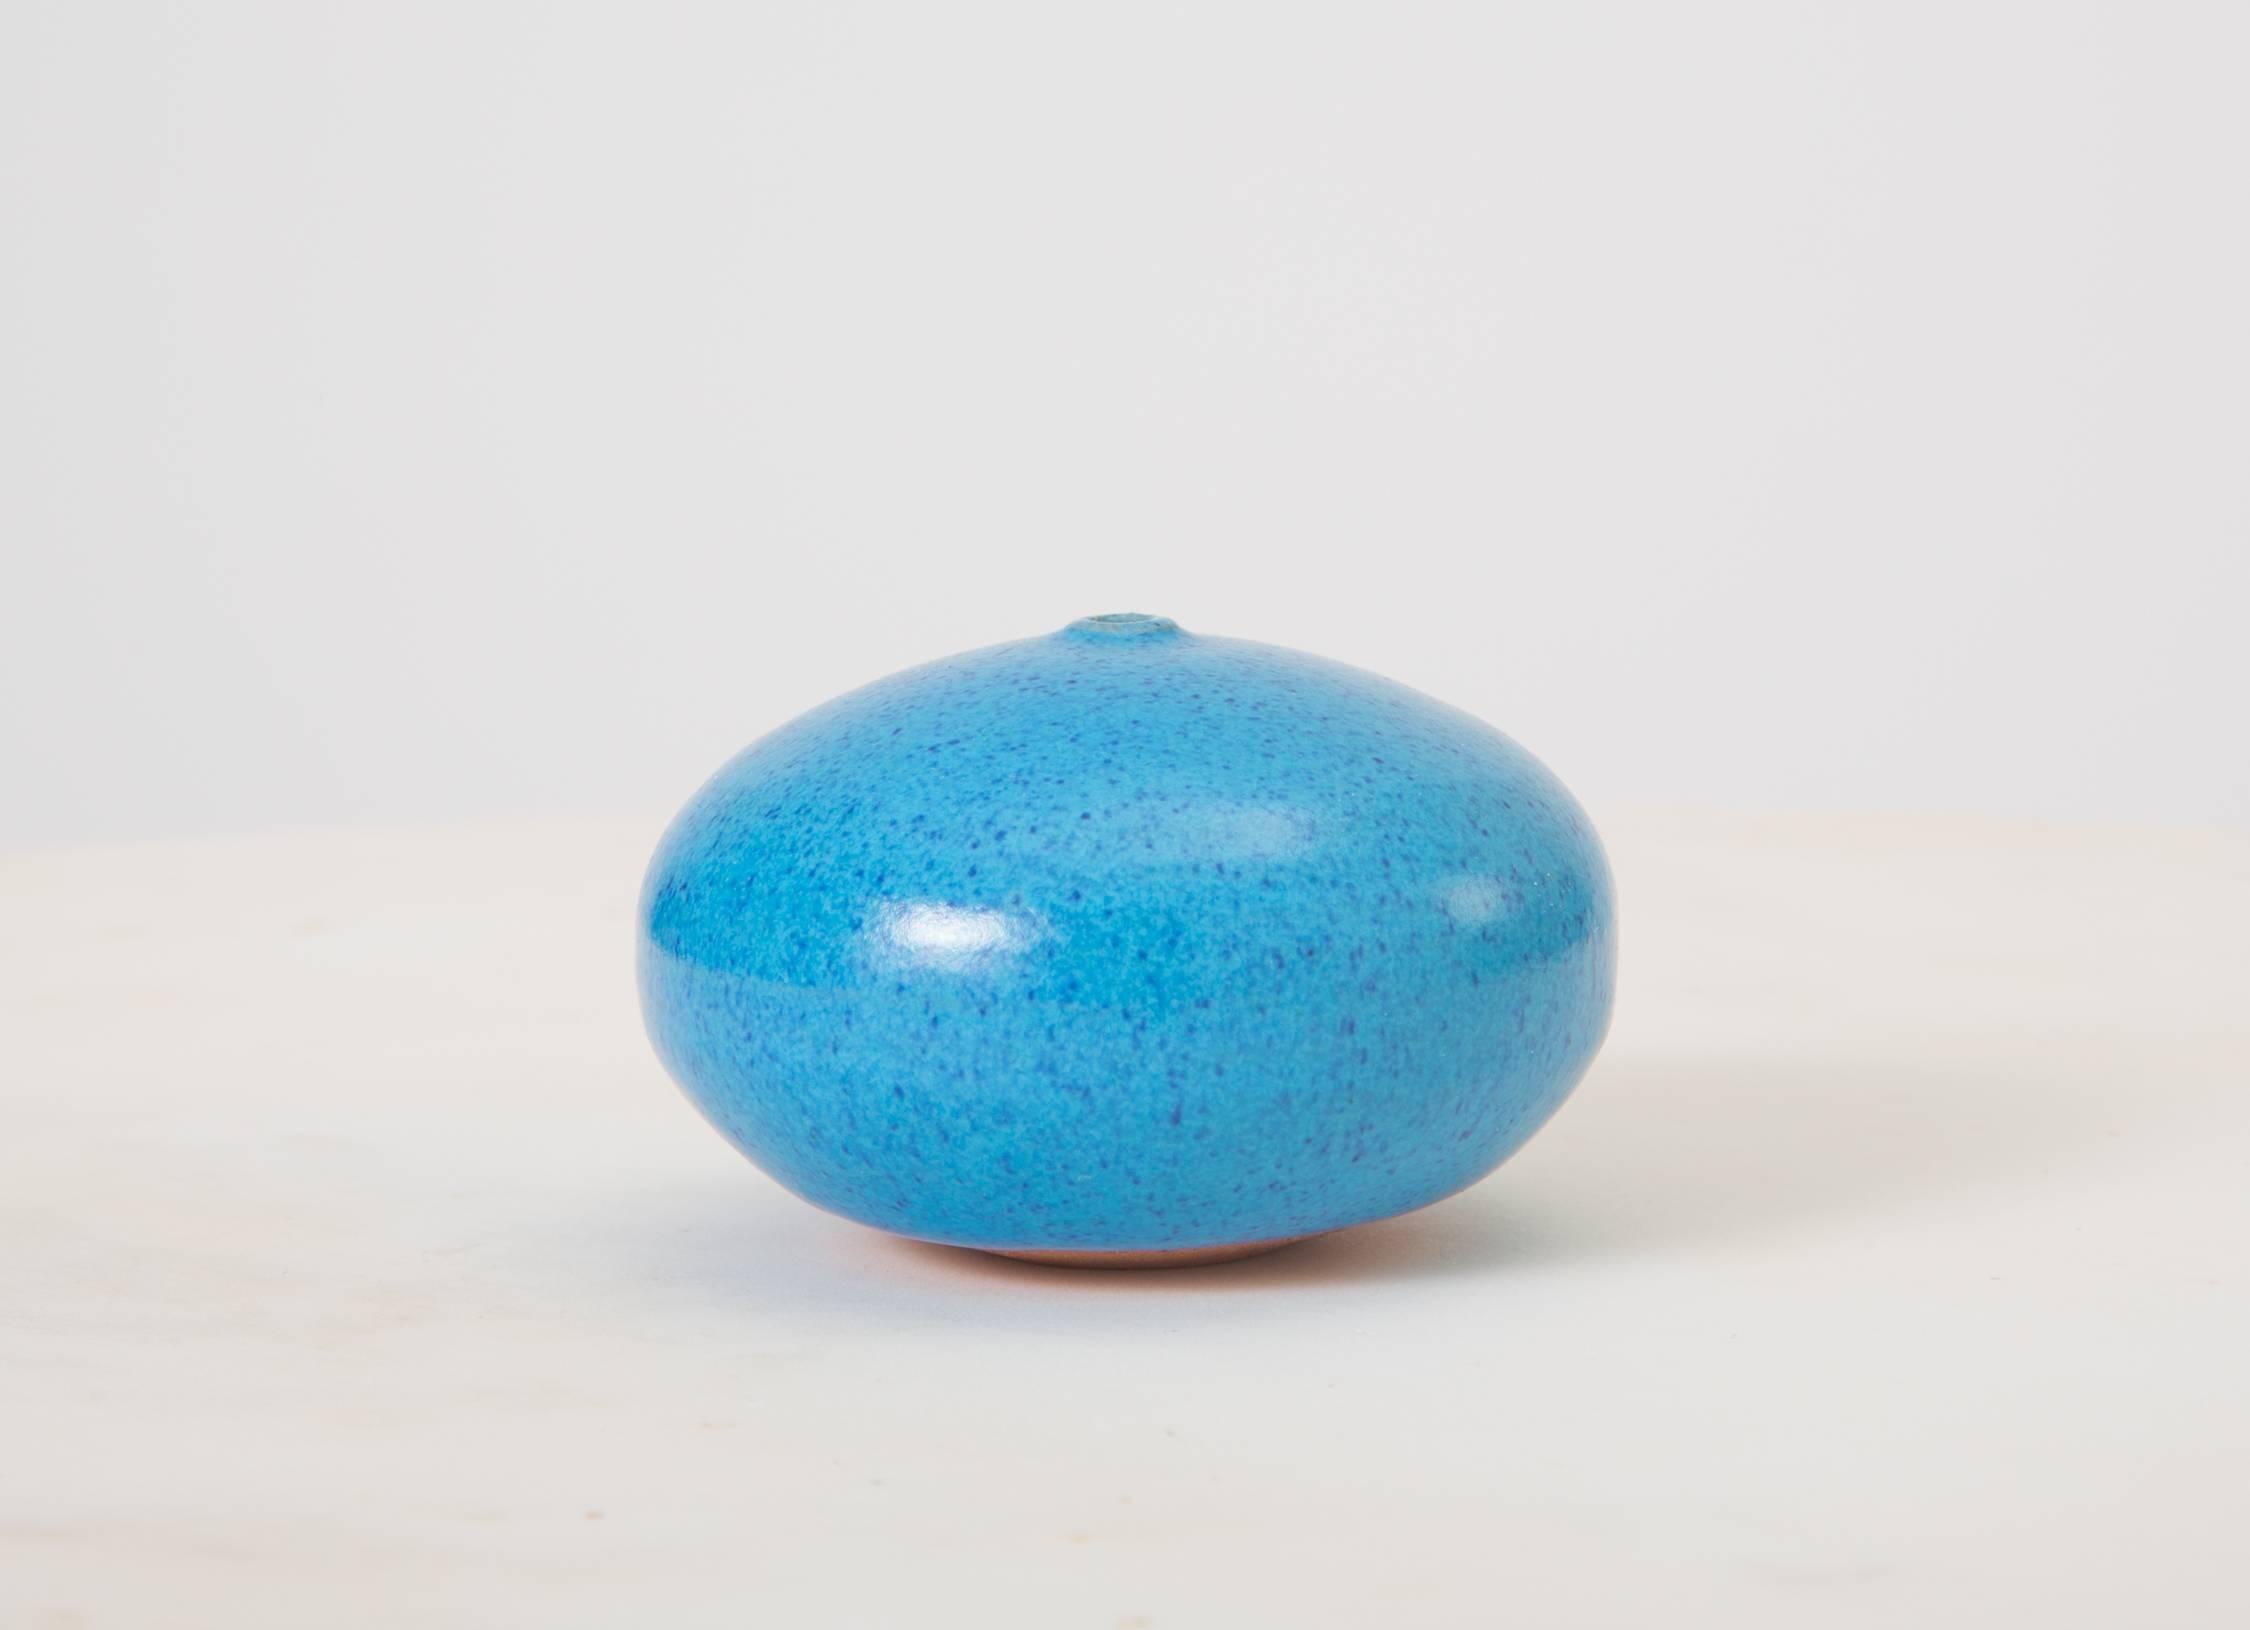 A one-of-kind weed pot by Los Angeles ceramics artist Doyle Lane. This diminutive example has a deceptively simple ovoid shape in a dimensional robin’s egg blue glaze with a matrix of suspended darker blue flecks. The glaze coats the upper ¾ of the